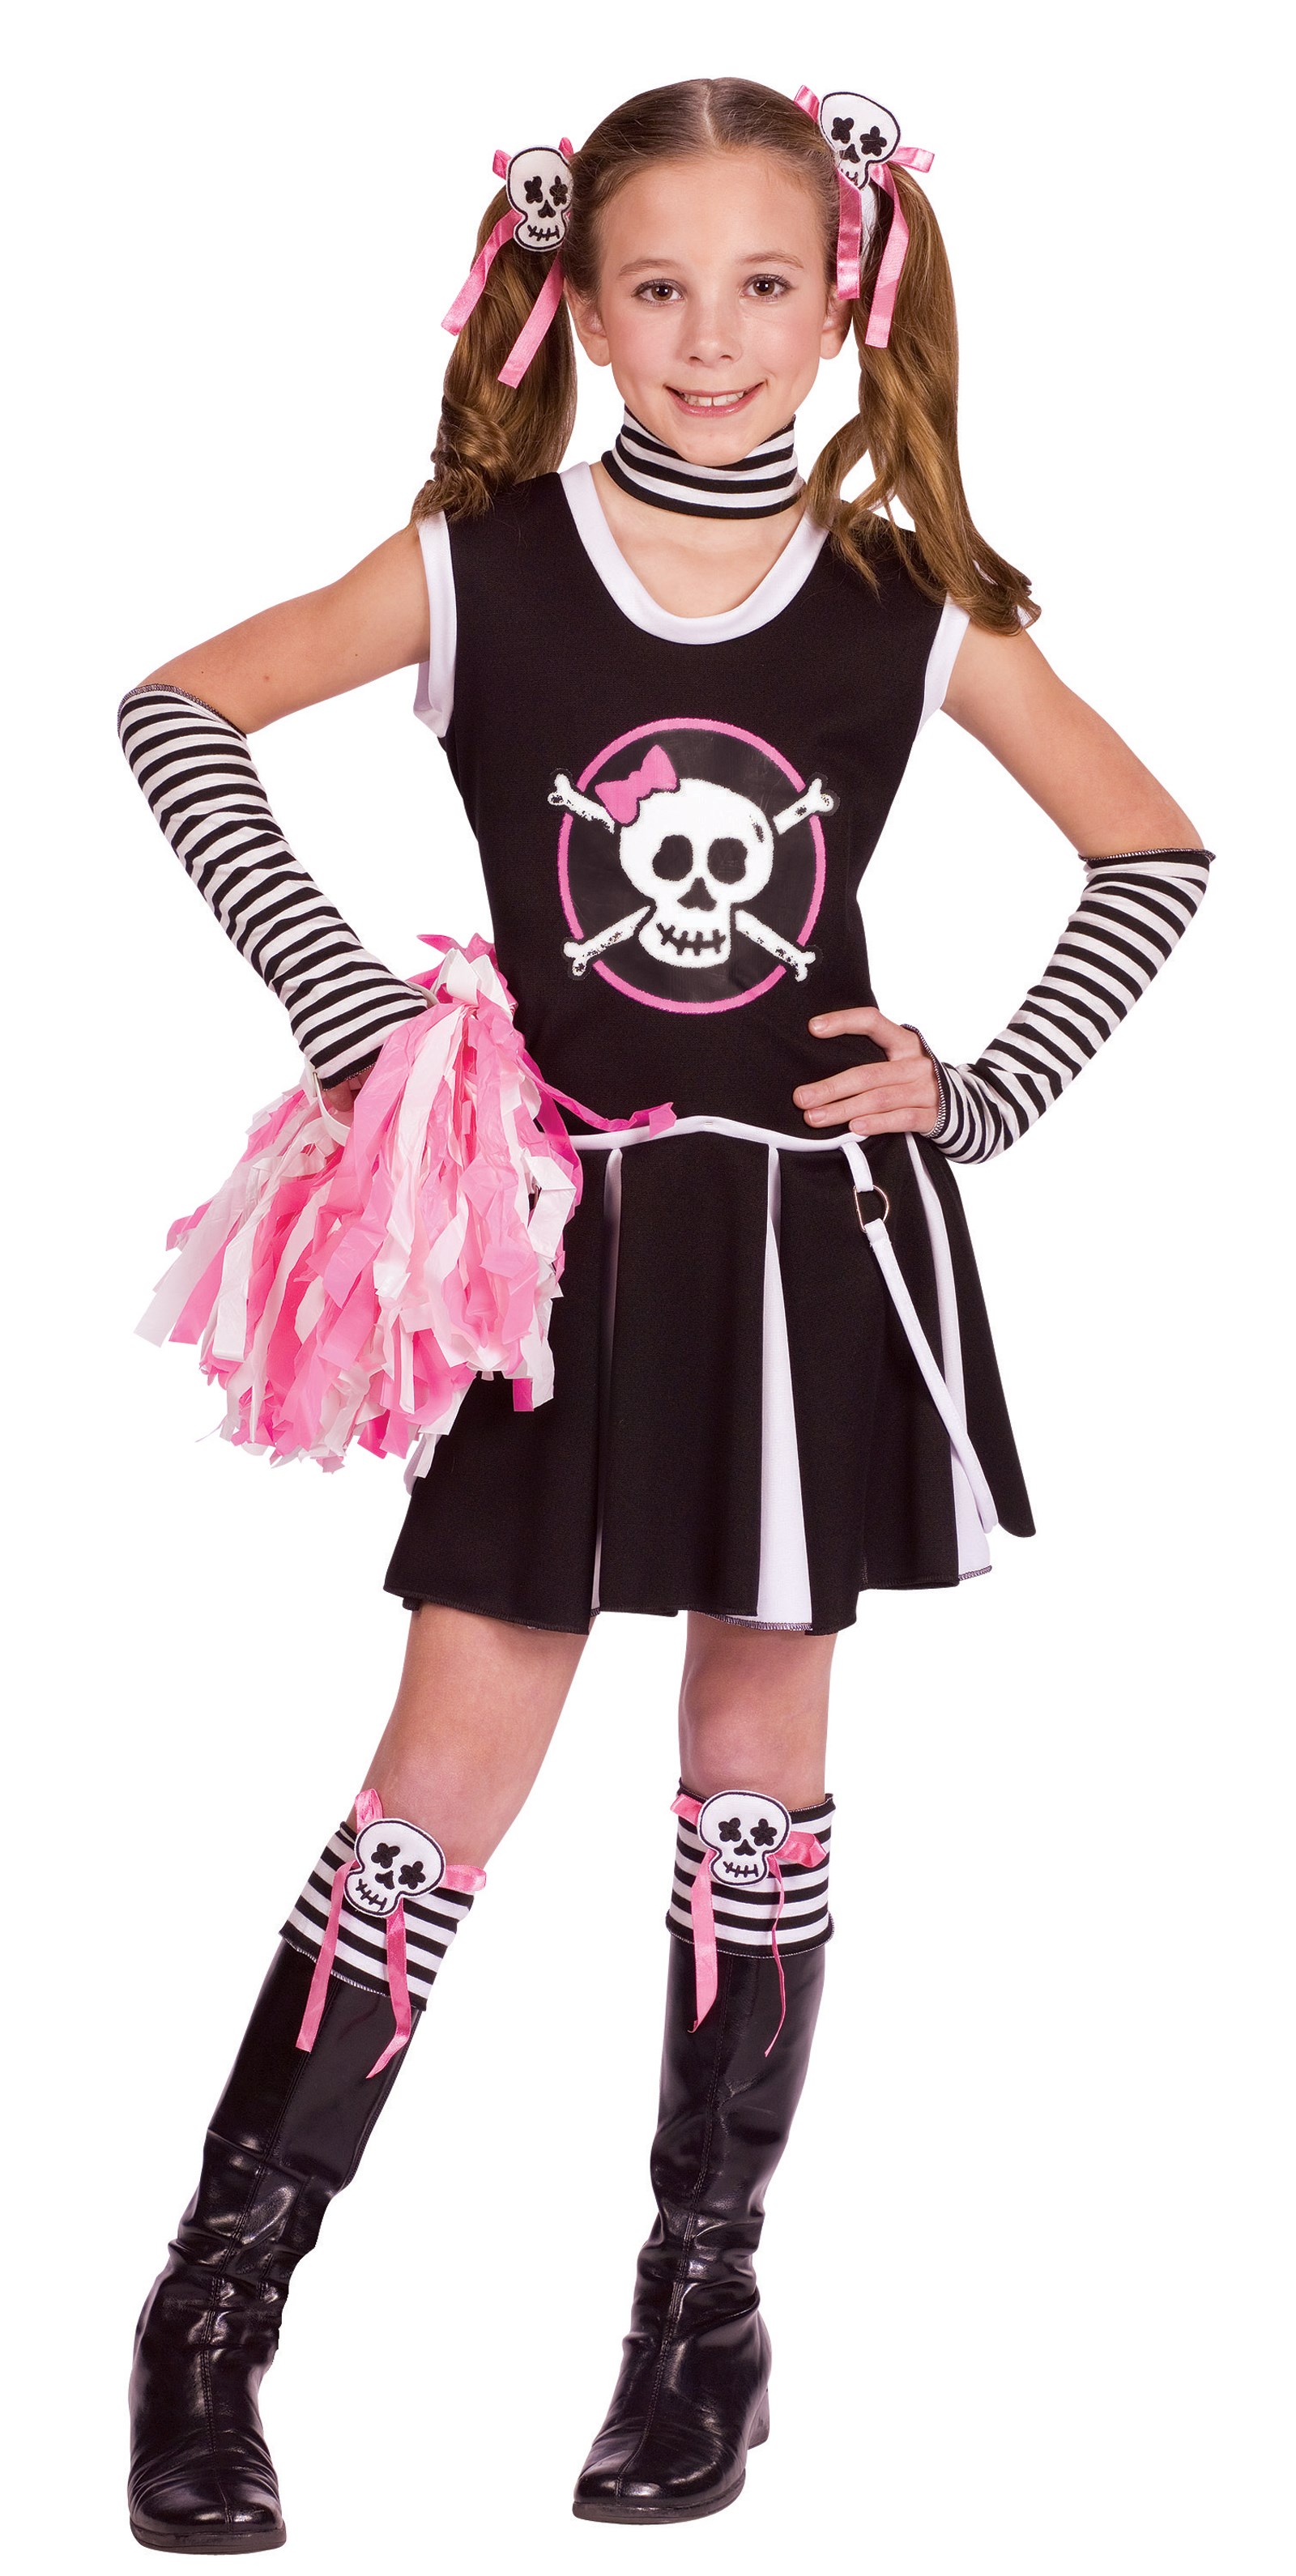 New for 2008 – Halloween Costumes for Young Girls | Shade354's Weblog